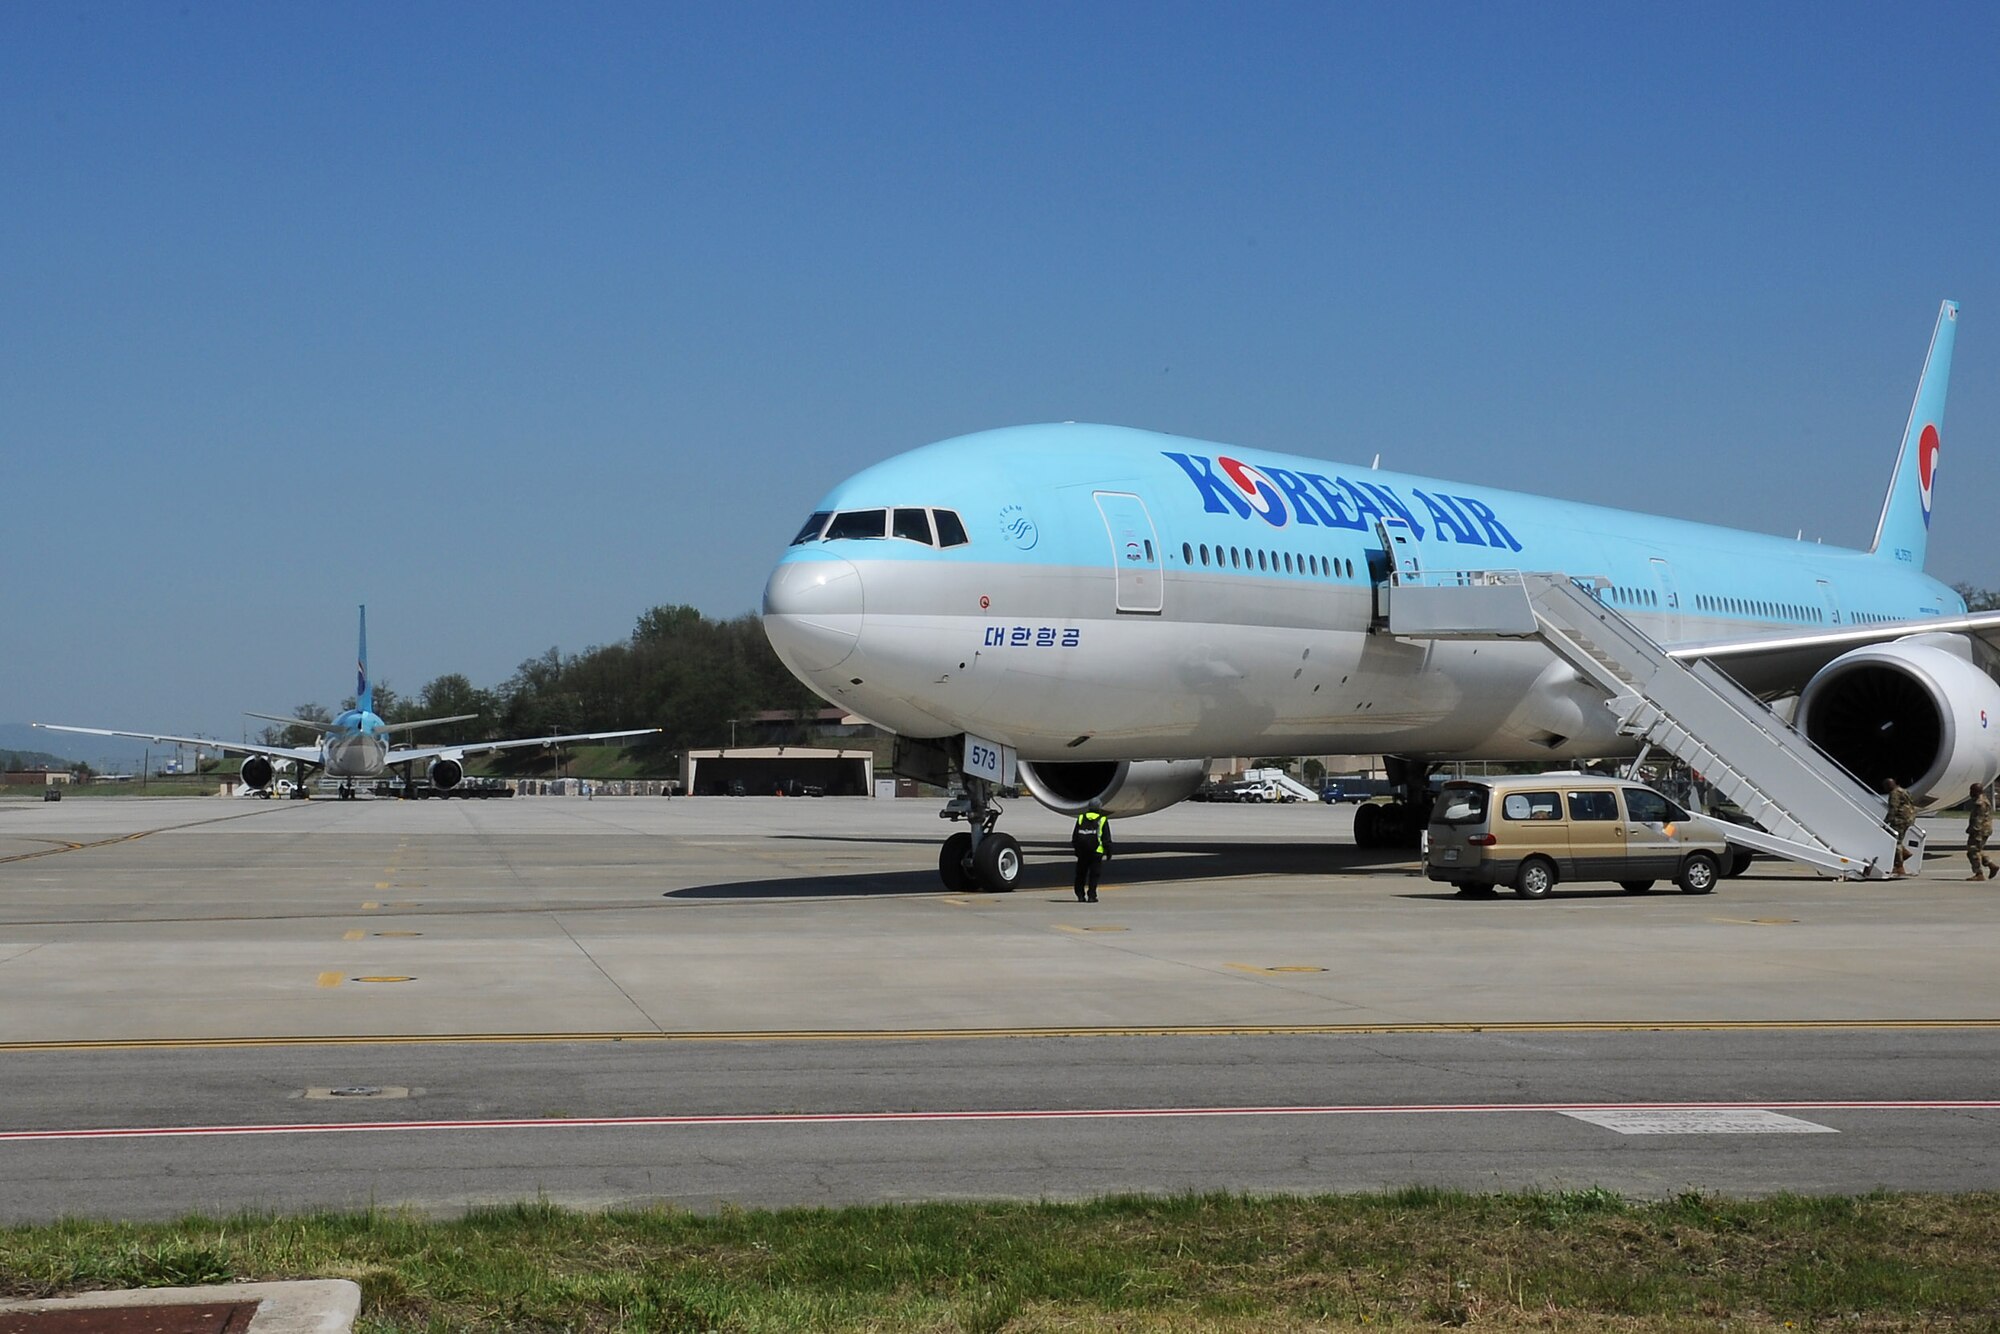 Two Korean Air Boeing 777 aircraft sit on the flightline during the Mutual Airlift Support Agreement (MASA) exercise at Osan Air Base, Republic of Korea May 4, 2018. Close coordination between U.S. Transportation Command at Scott Air Force Base, Illinois, the ROK Air Force, U.S. Forces Korea, Korean Air and the Osan Air Base team was required to accomplish the transport of more than 500 Soldiers to exercise Balikatan in the Philippines. (U.S. Air Force photo by Tech. Sgt. Ashley Tyler)